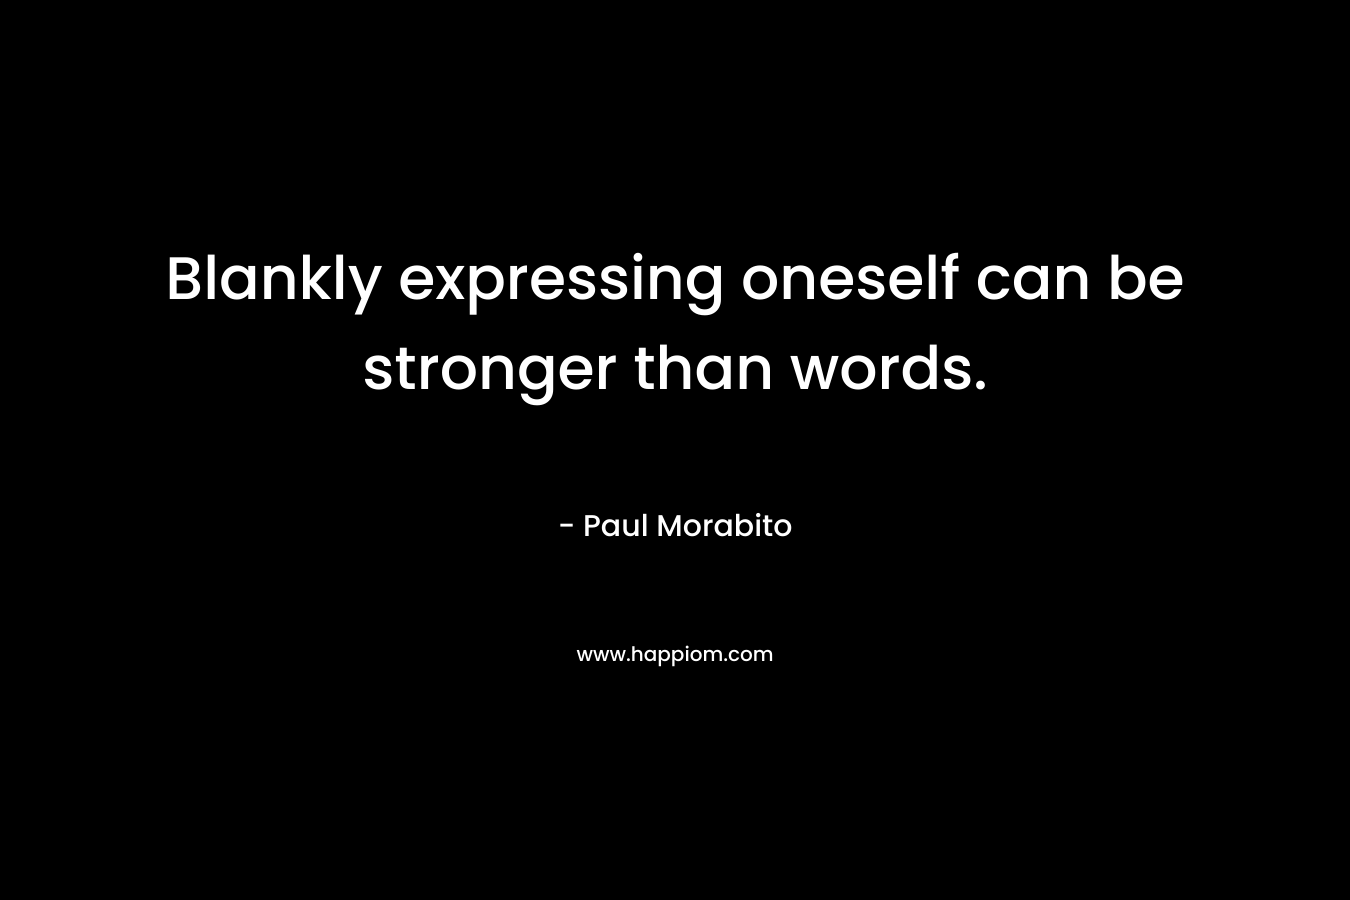 Blankly expressing oneself can be stronger than words. – Paul Morabito